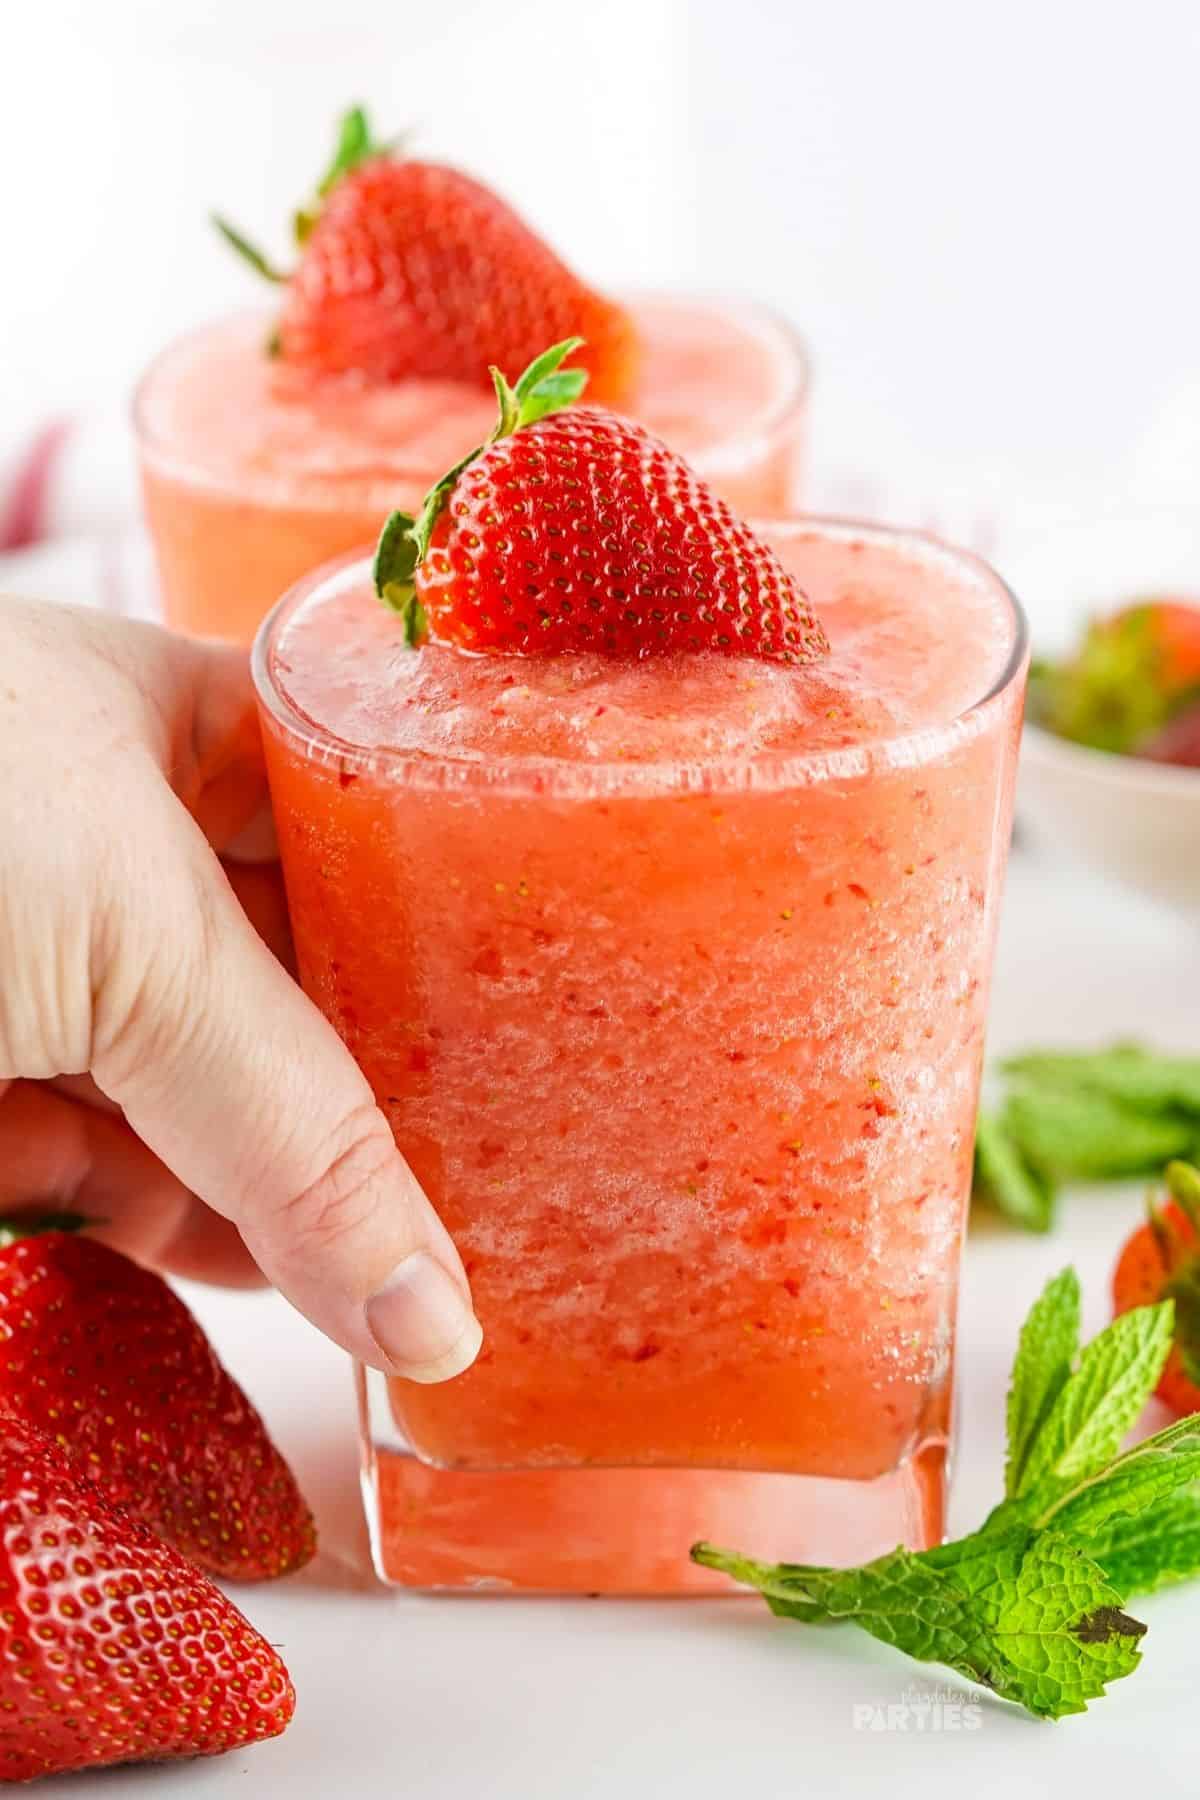 A woman's hand holding a glass filled with a fruity frozen drink.